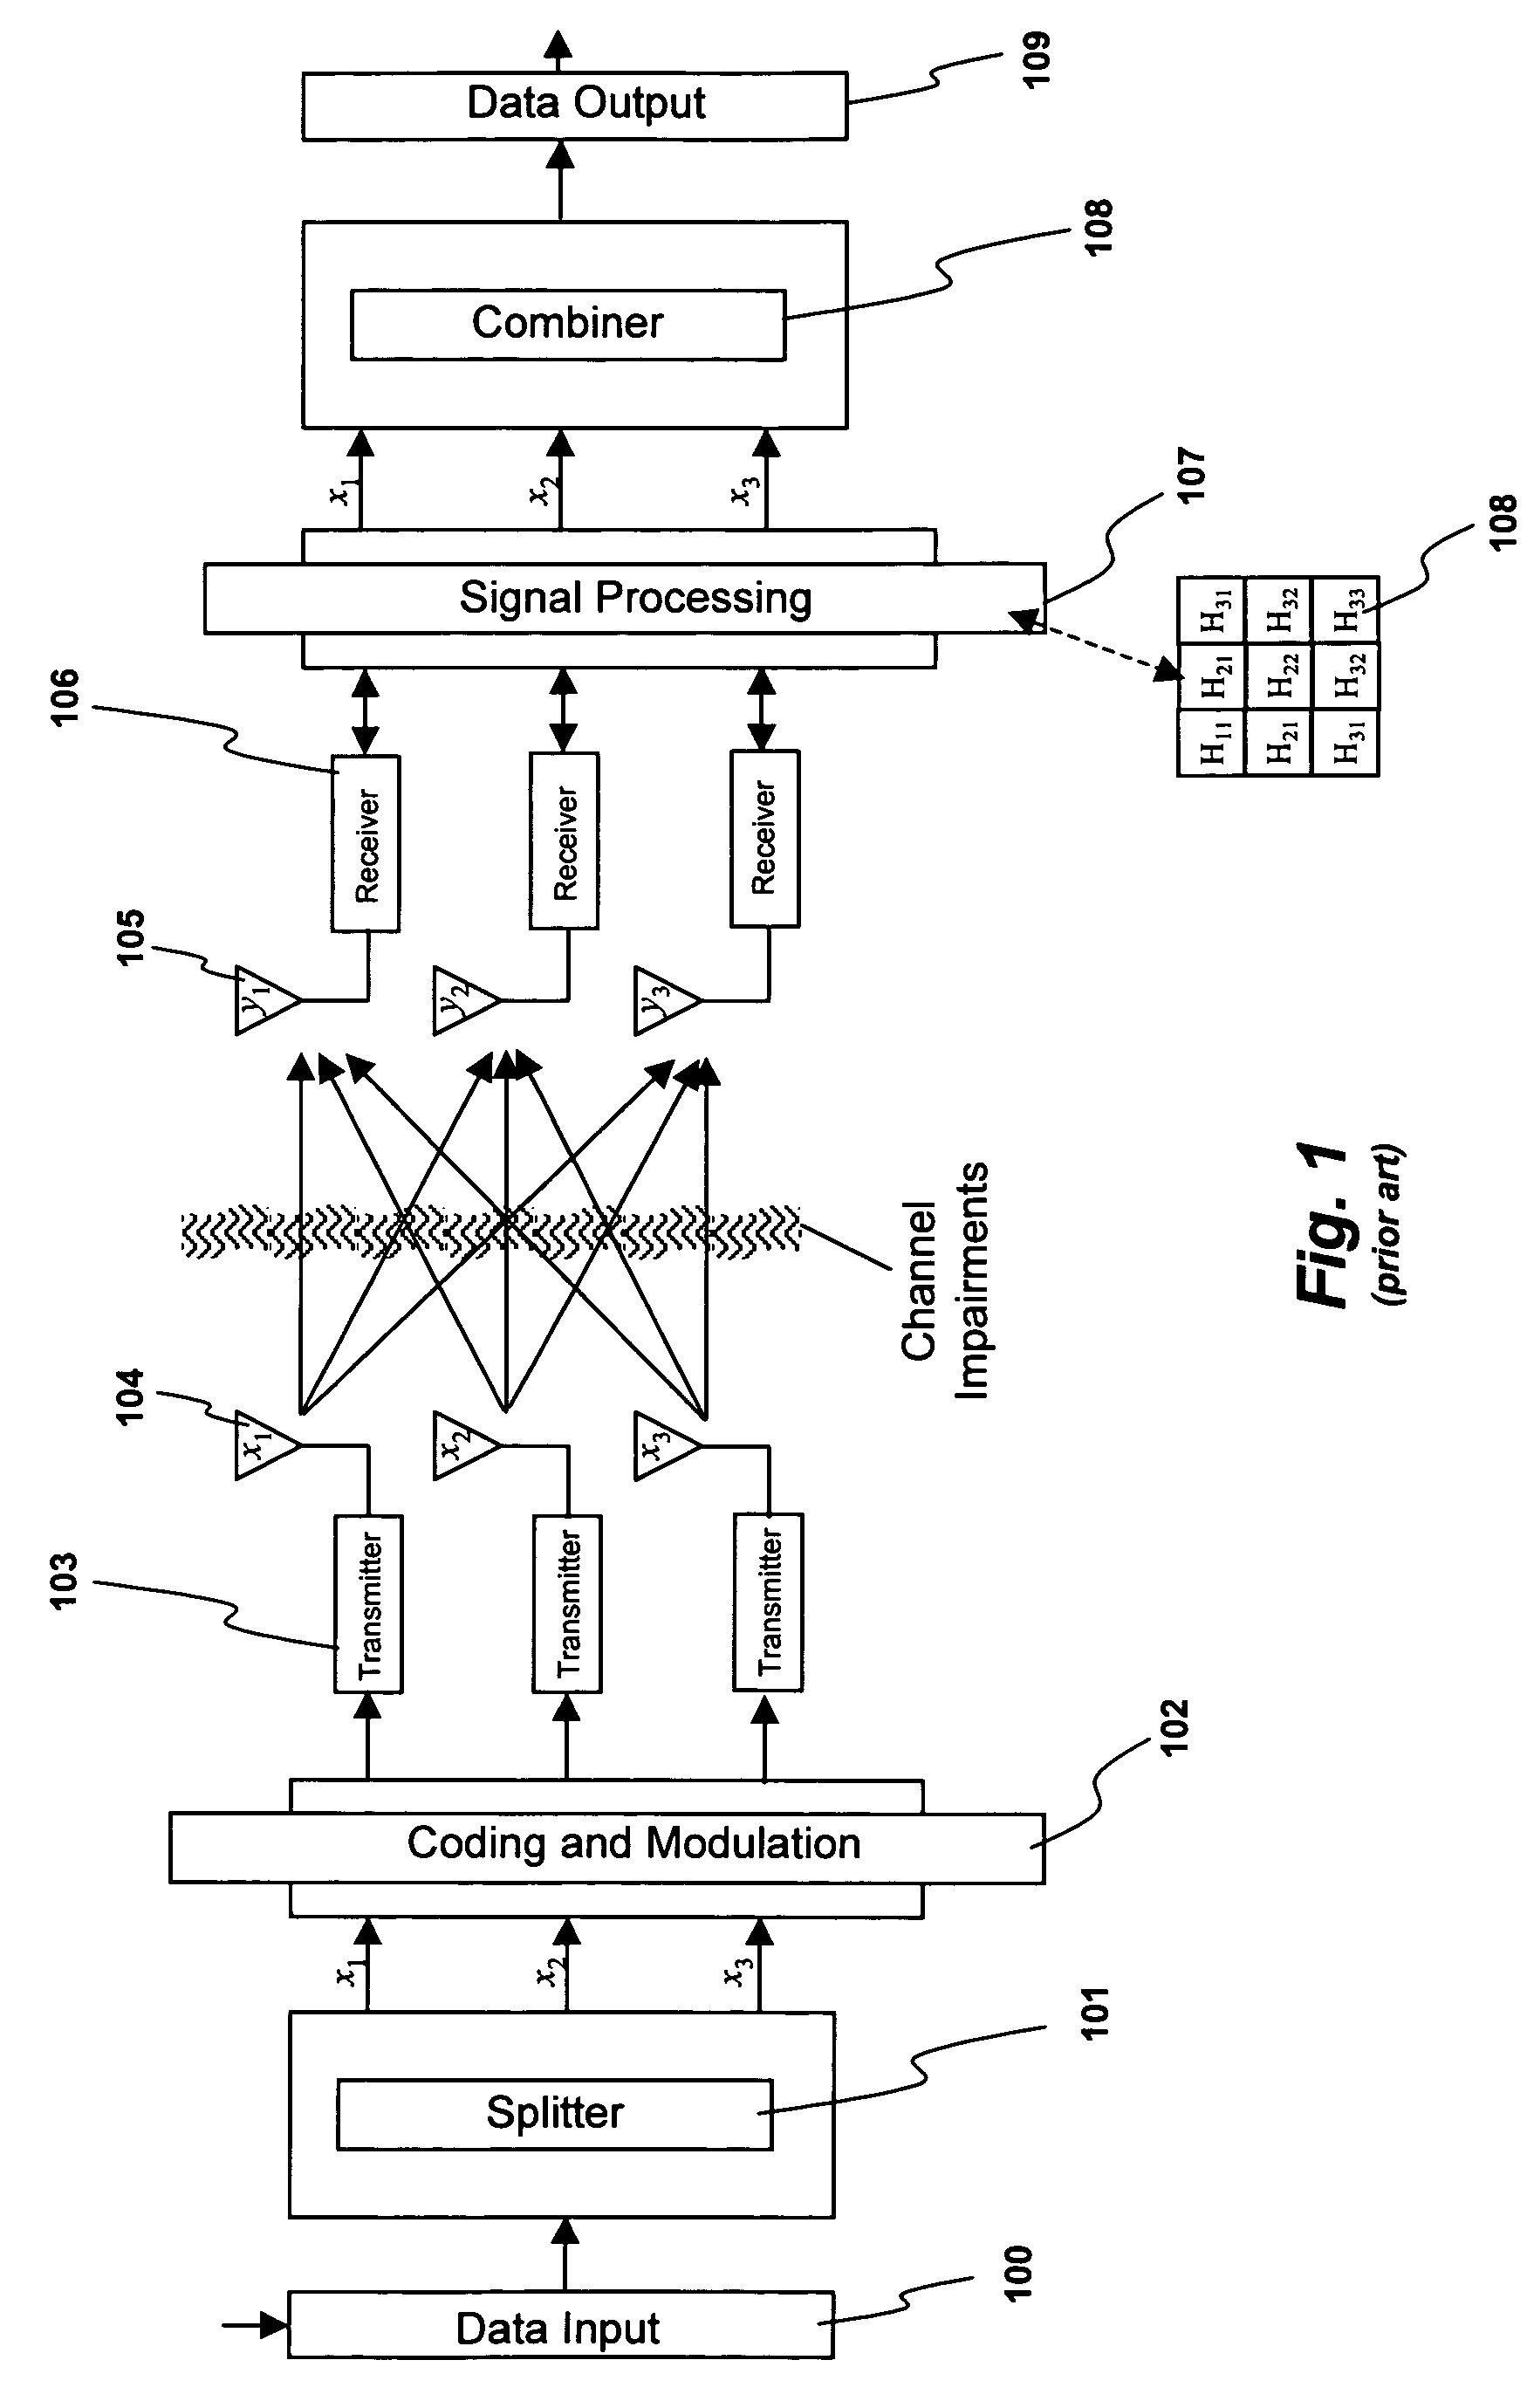 System and method for distributed input-distributed output wireless communications